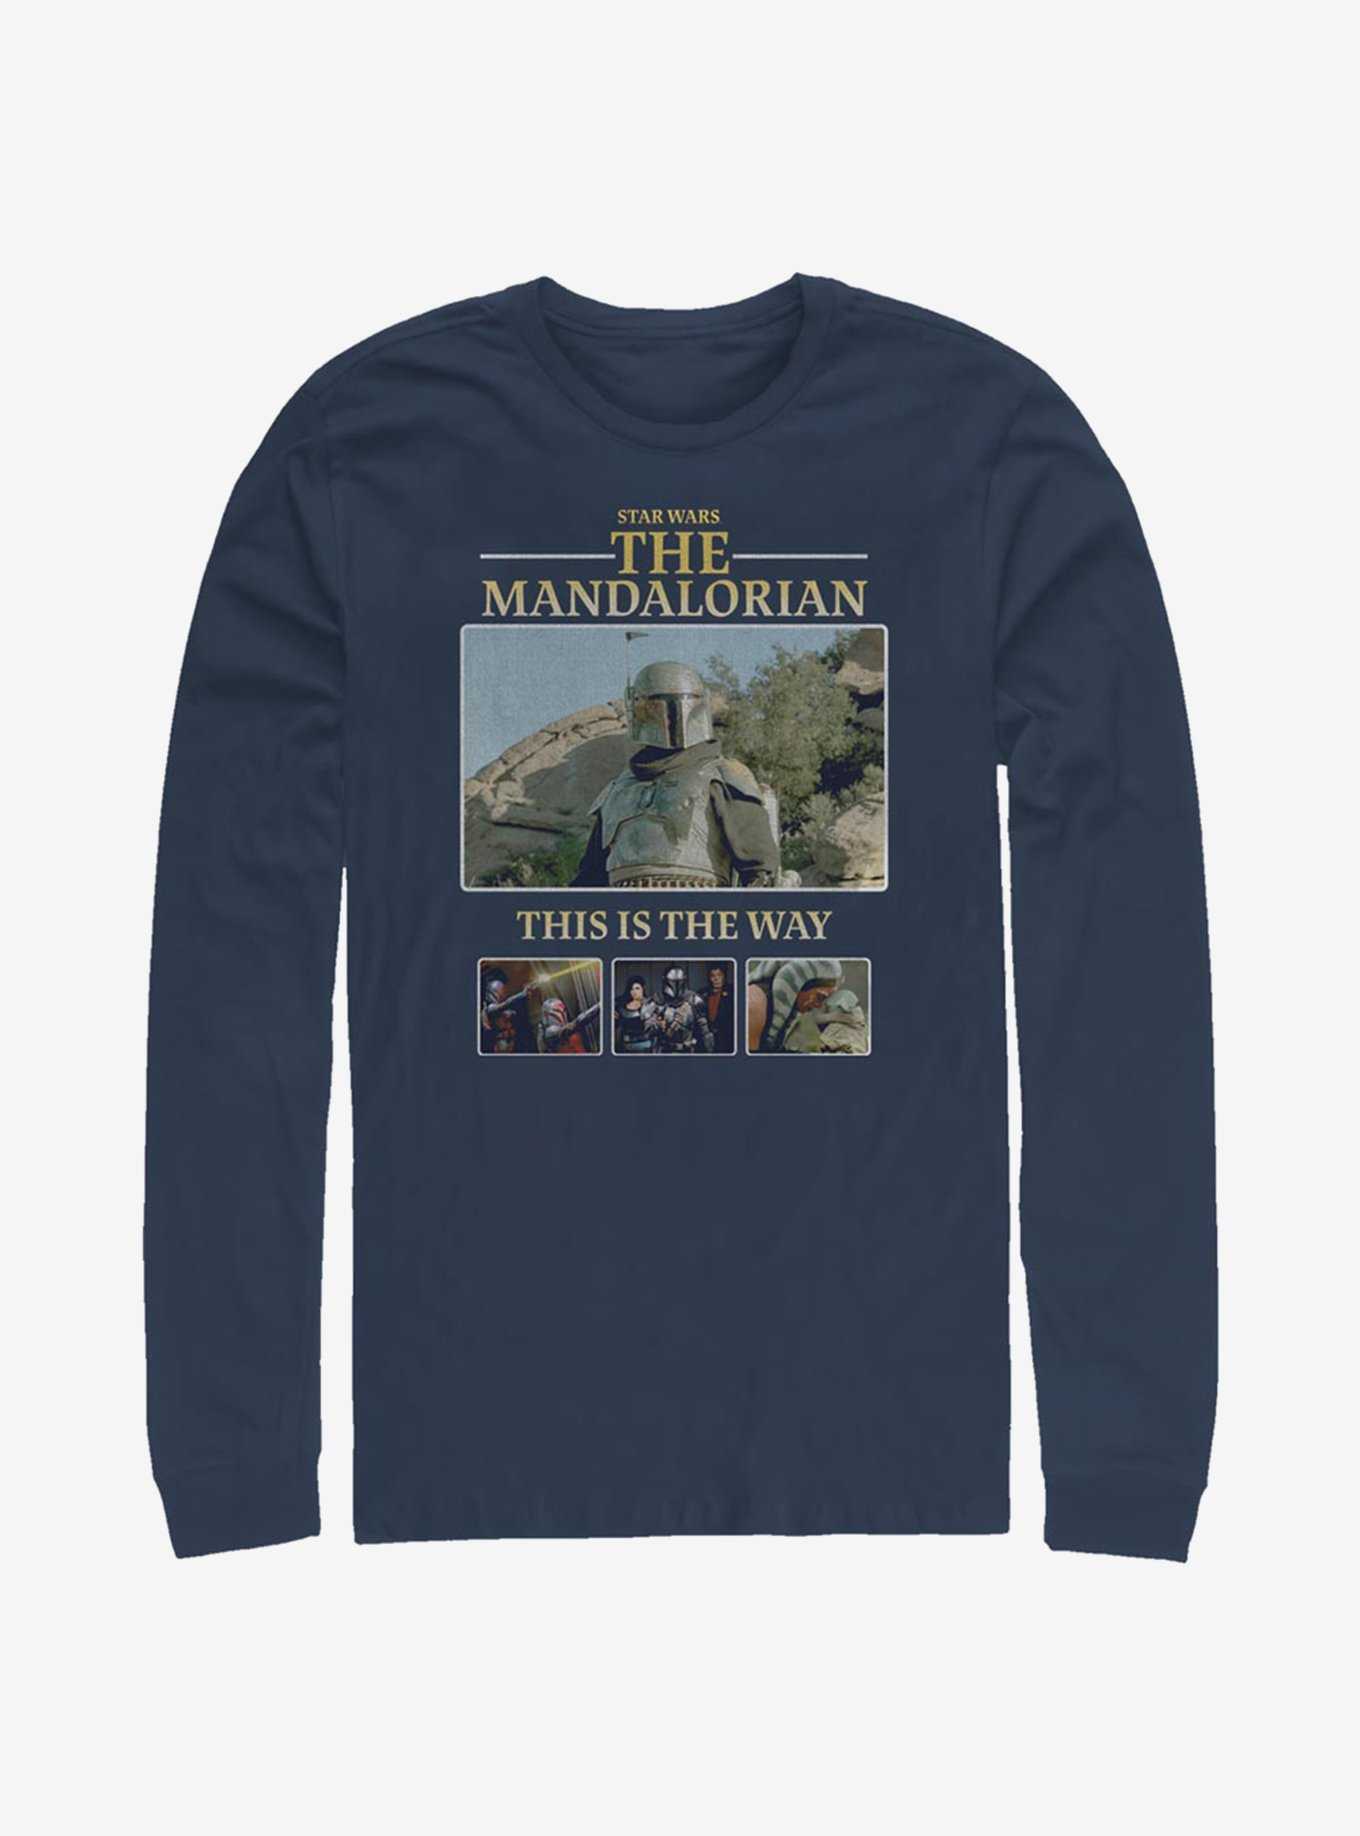 Star Wars The Mandalorian This Is The Way Team Long-Sleeve T-Shirt, , hi-res